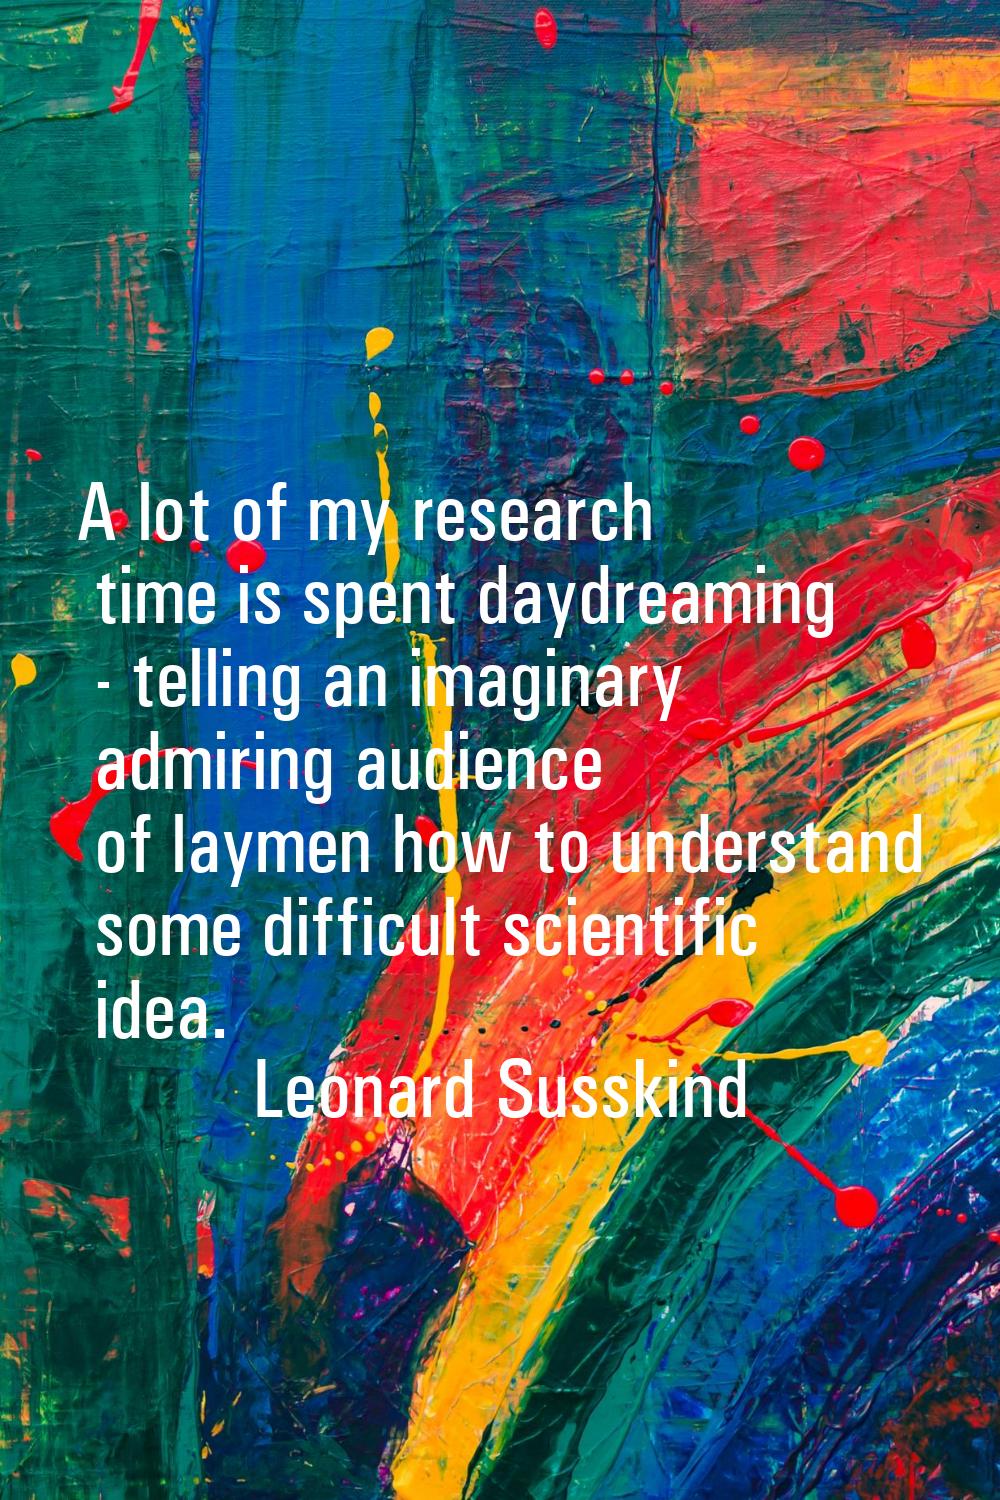 A lot of my research time is spent daydreaming - telling an imaginary admiring audience of laymen h